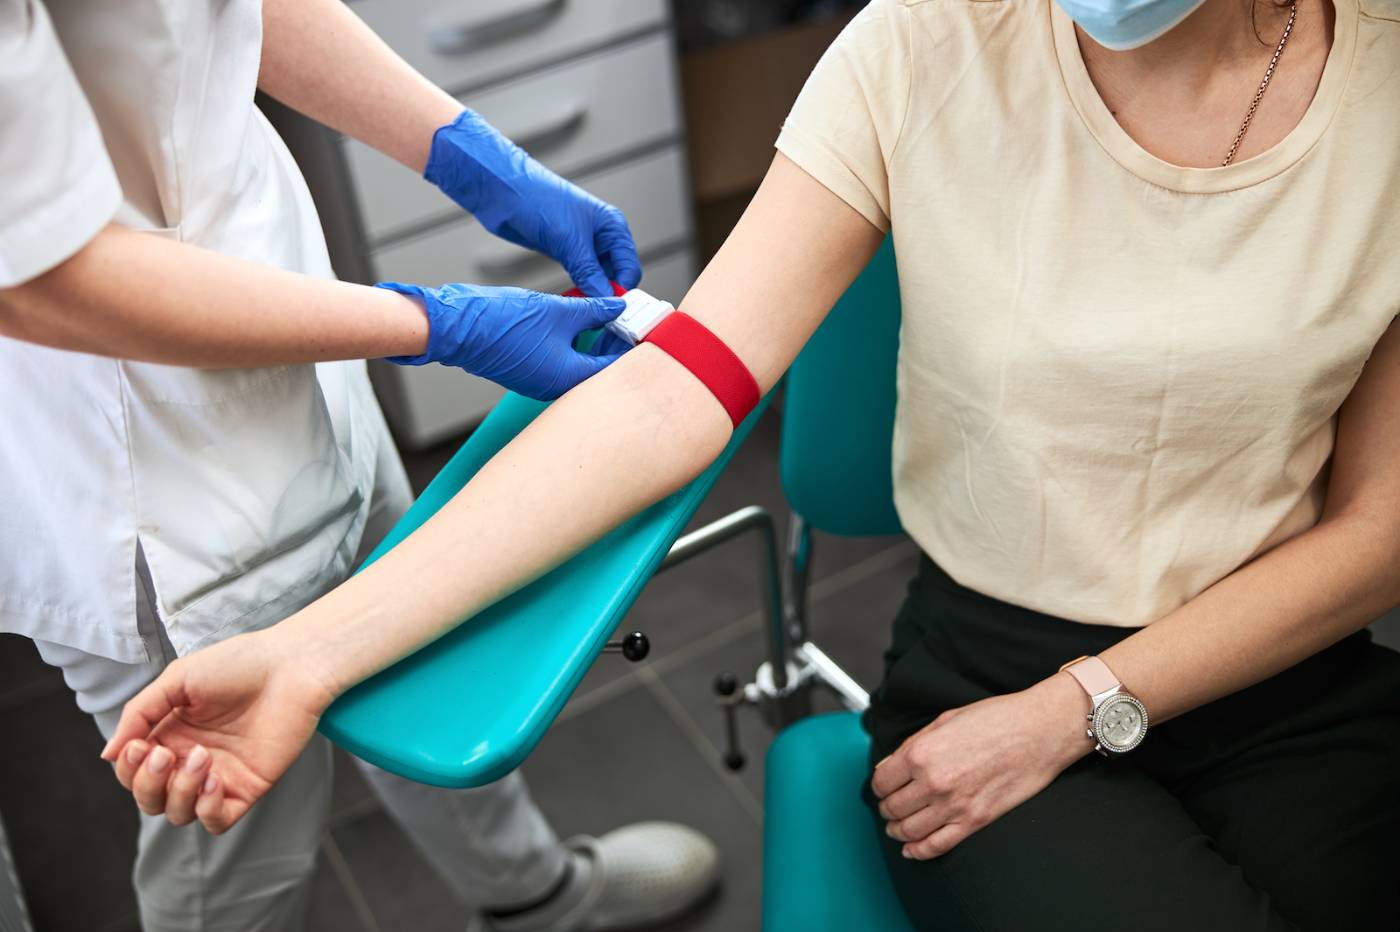 Medical lab assistant preparing to draw blood from patient